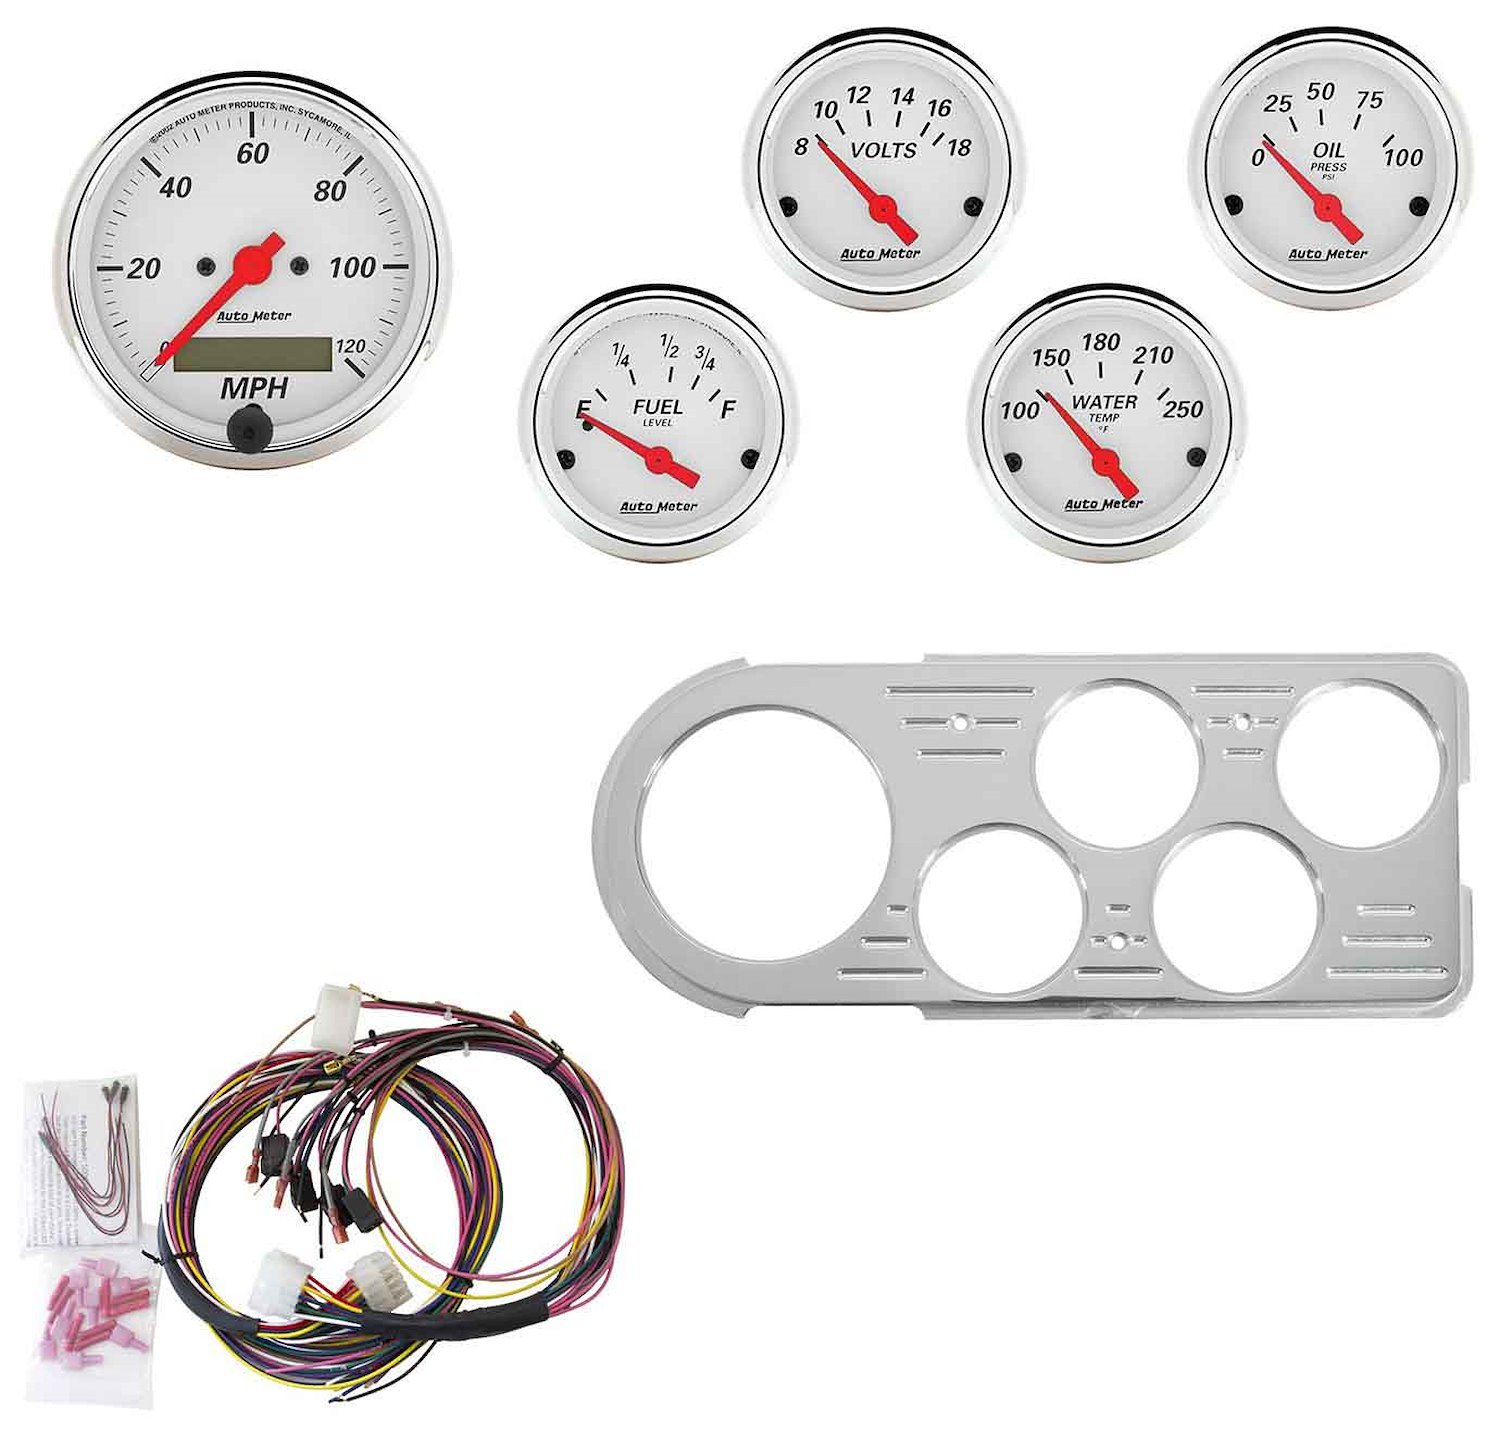 5-Gauge Direct-Fit Dash Kit 1948-1950 Ford Truck - Arctic White Series - Polished Panel